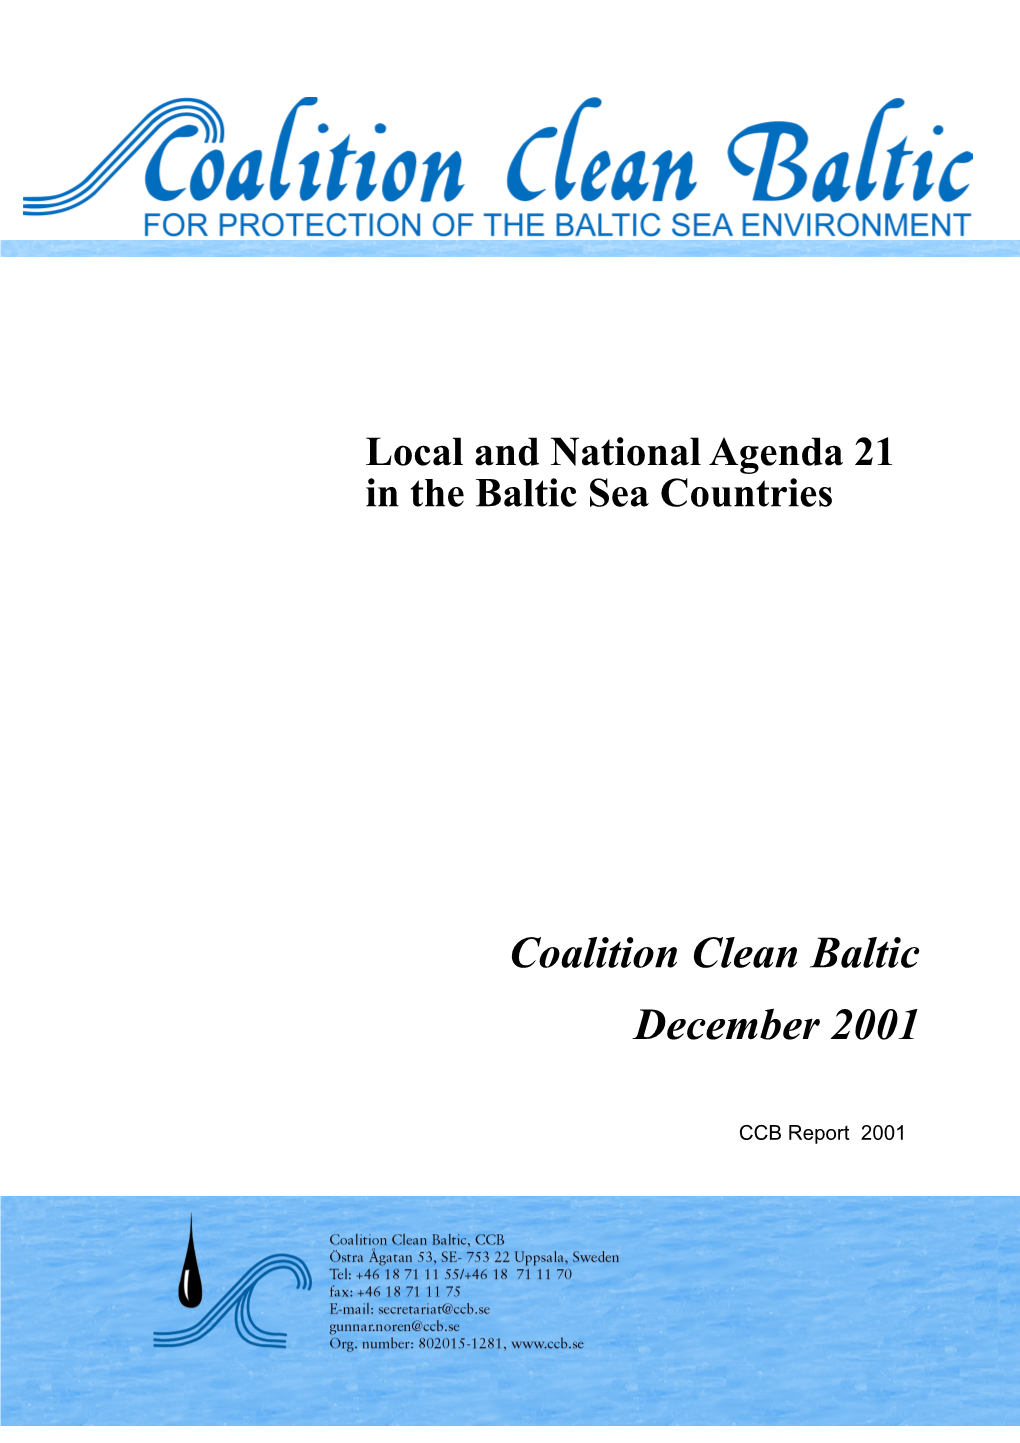 Local and National Agenda 21 in the Baltic Sea Countries